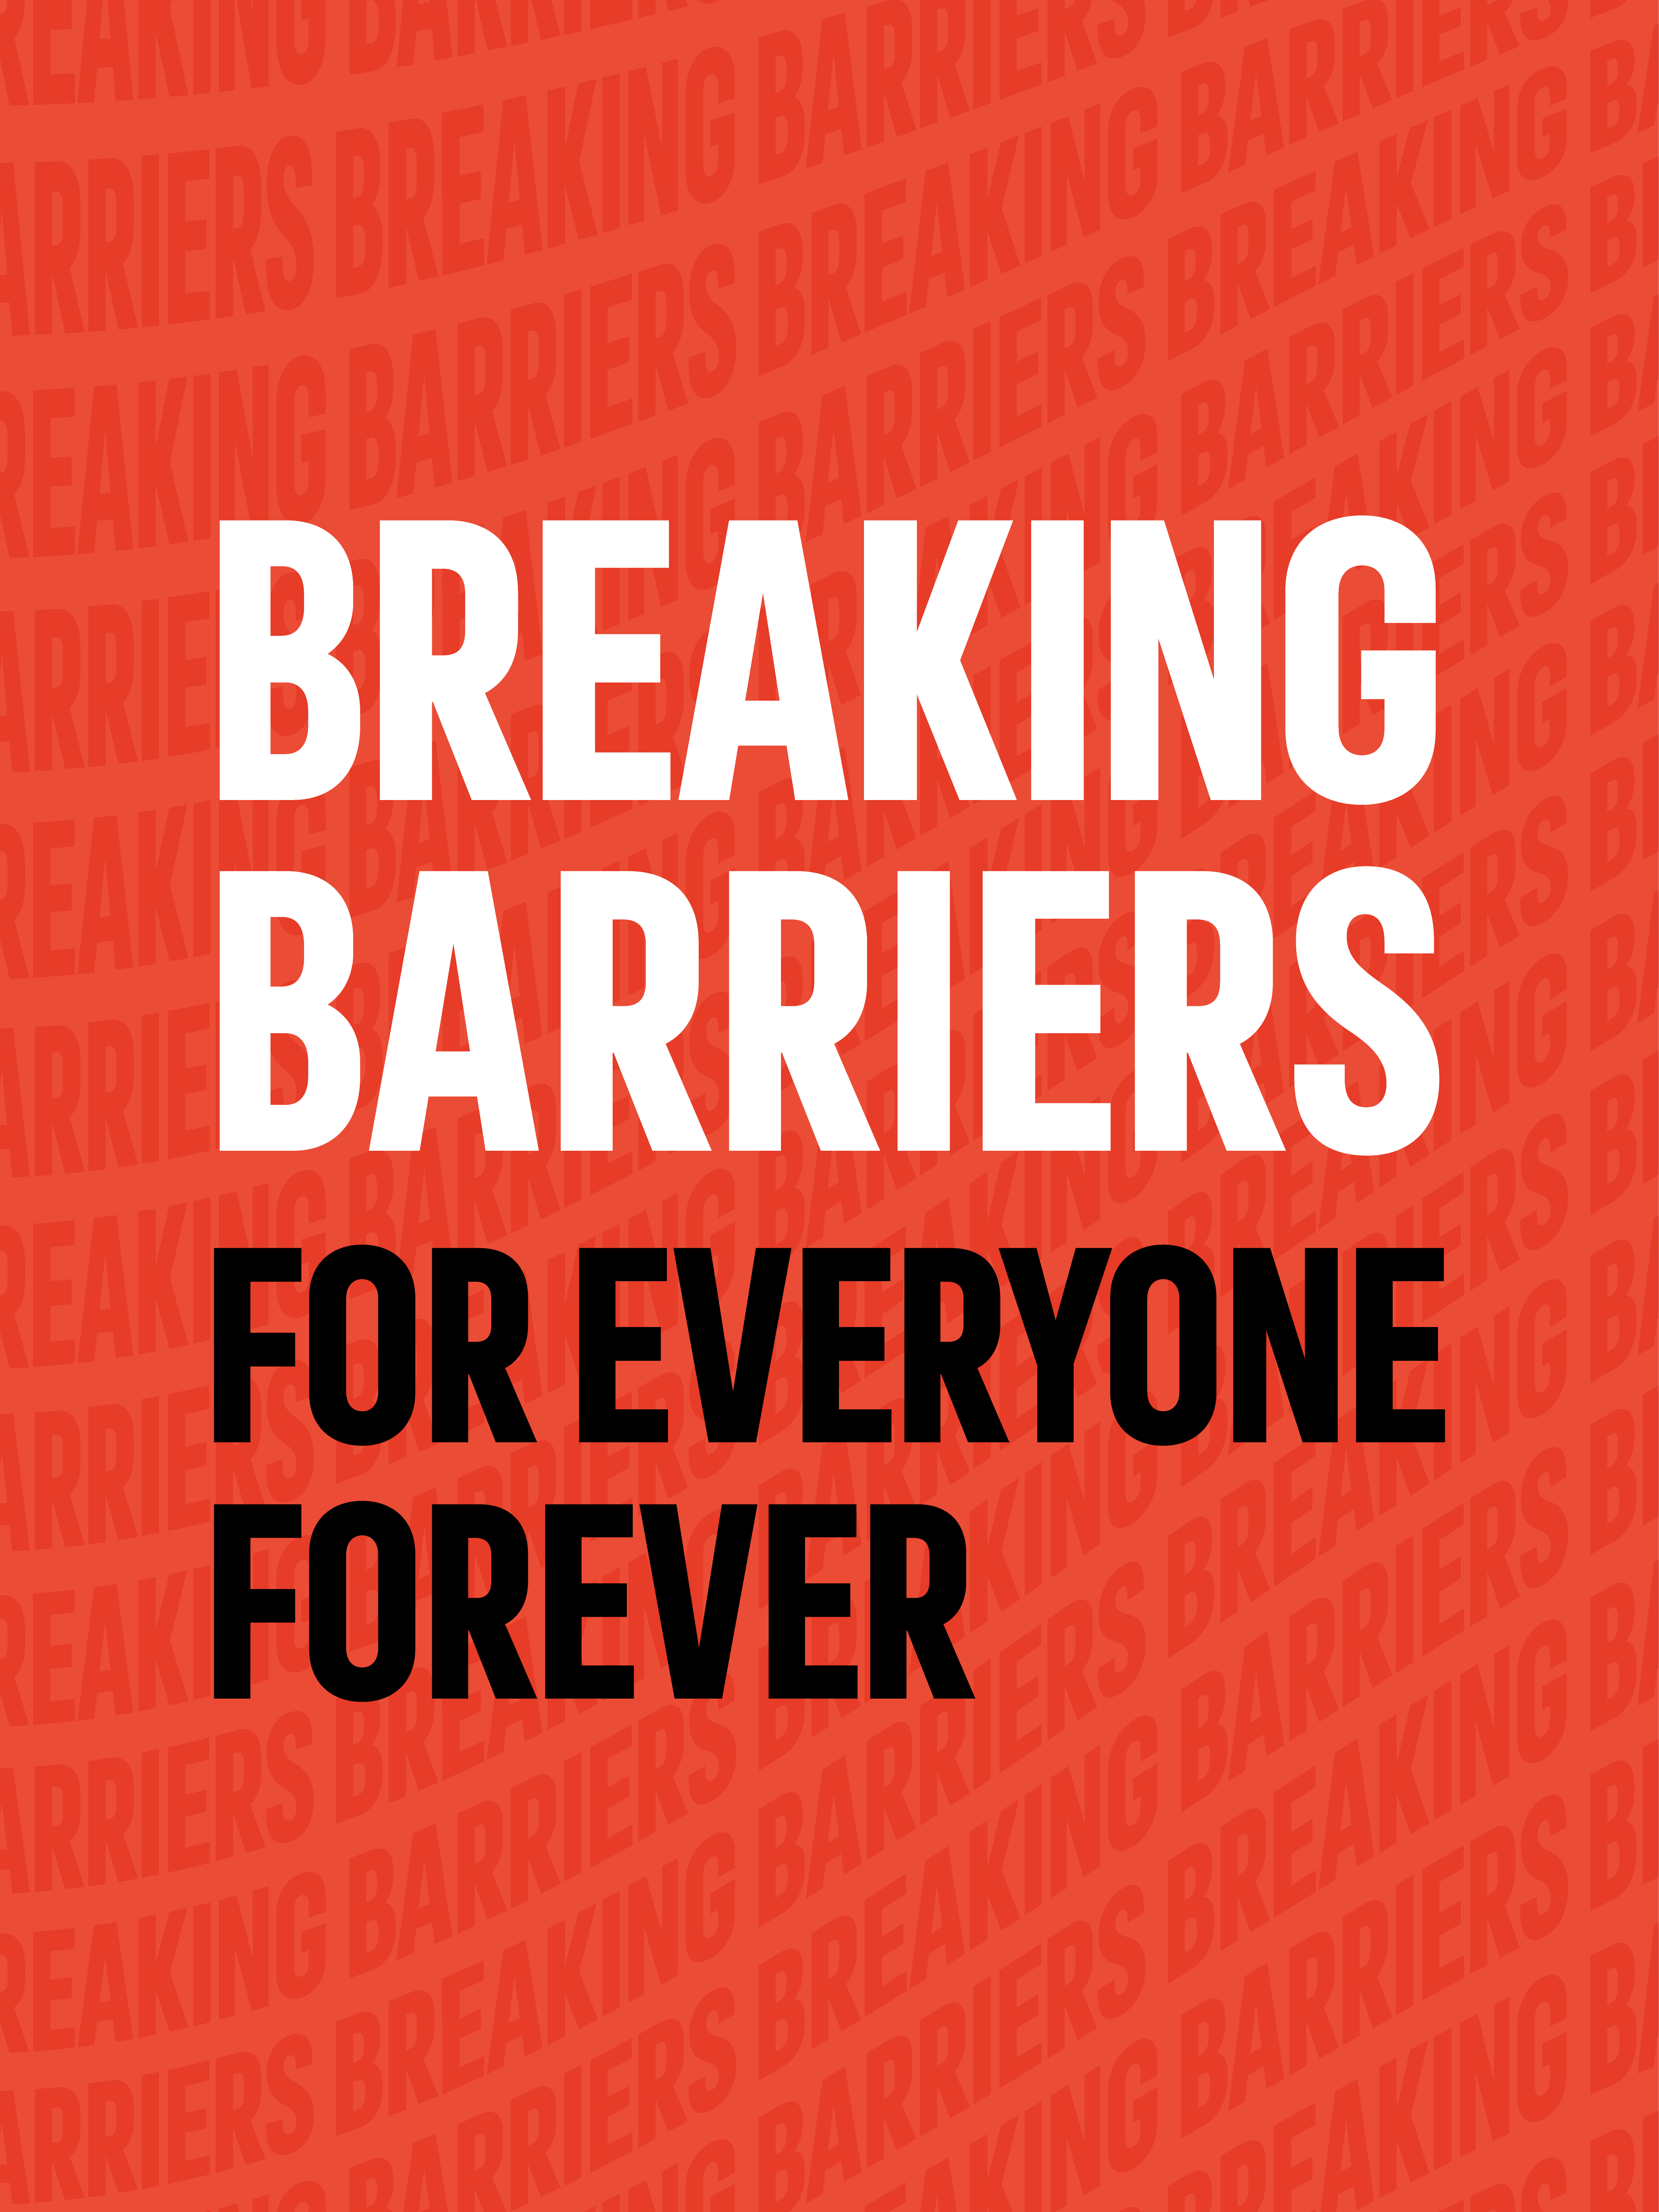 Breaking Barriers. For Everyone. Forever.